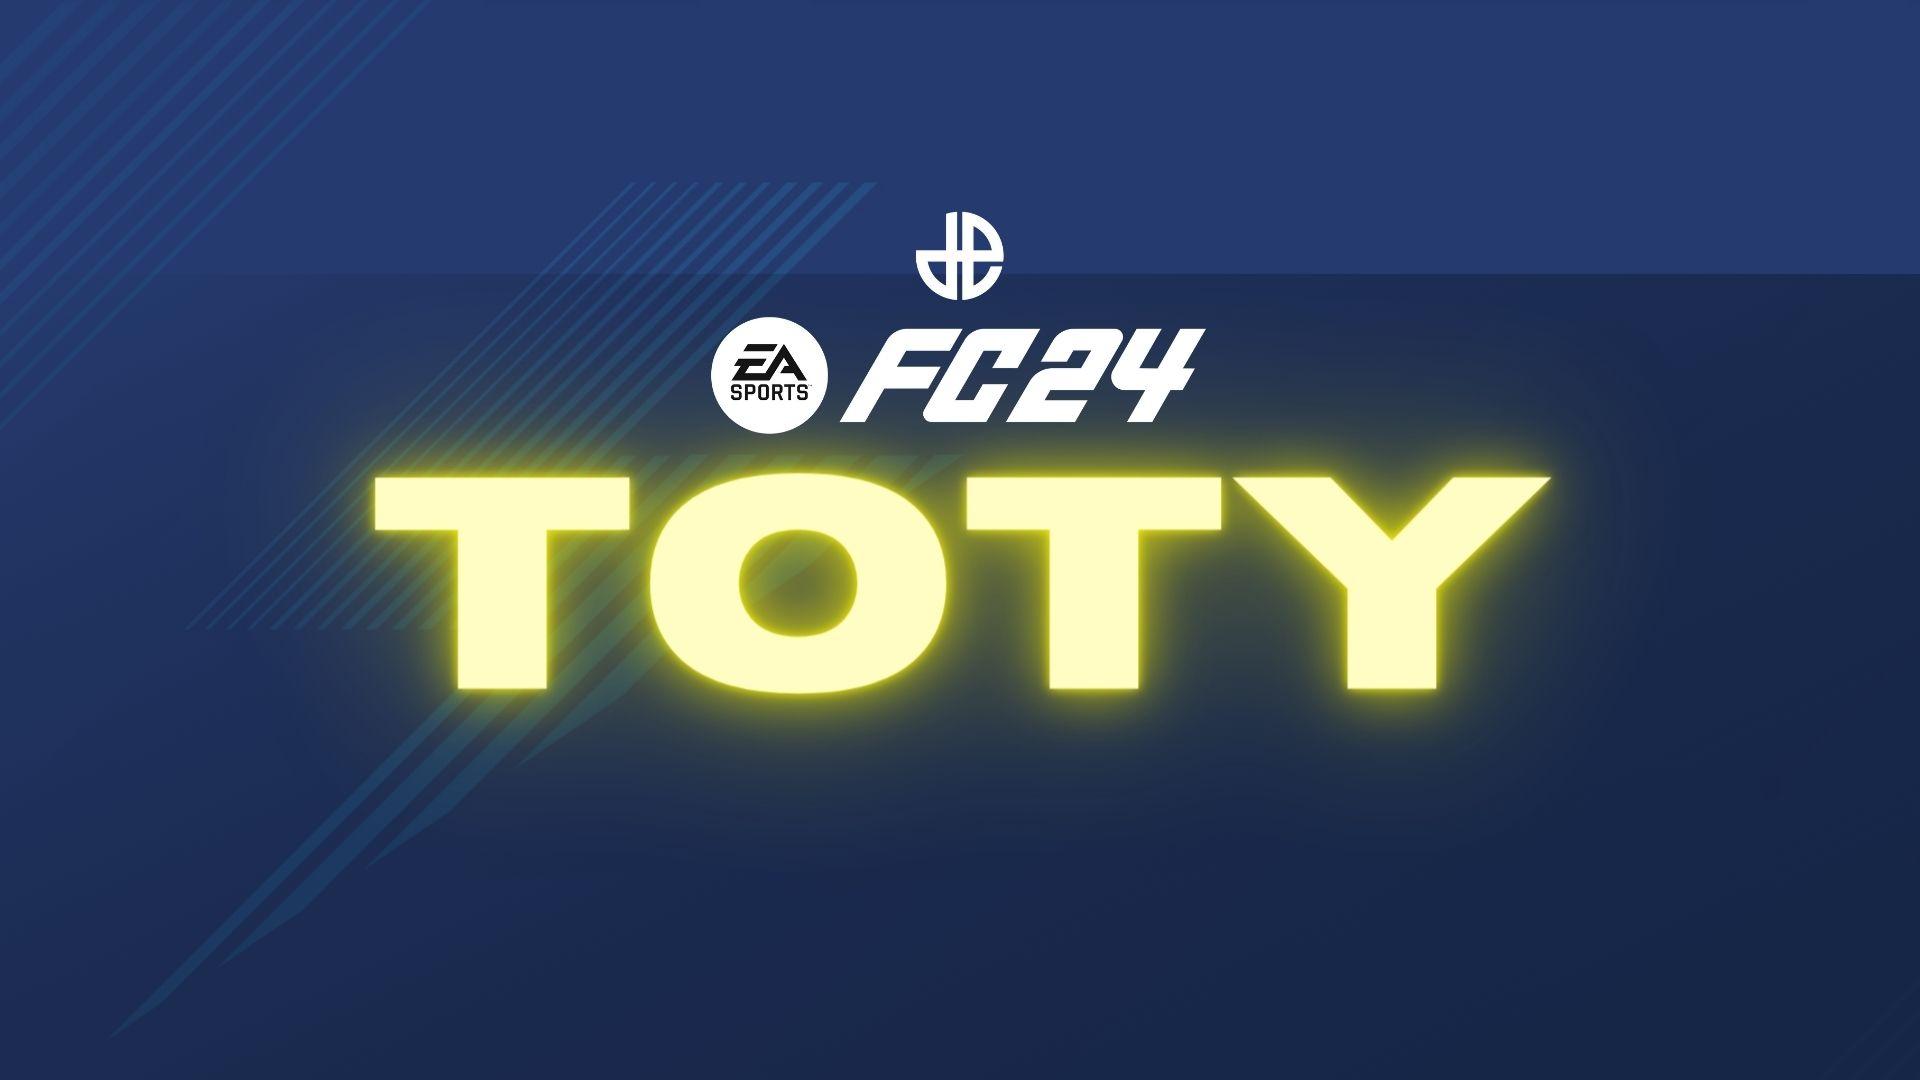 EA SPORTS FC 24 logo with TOTY text